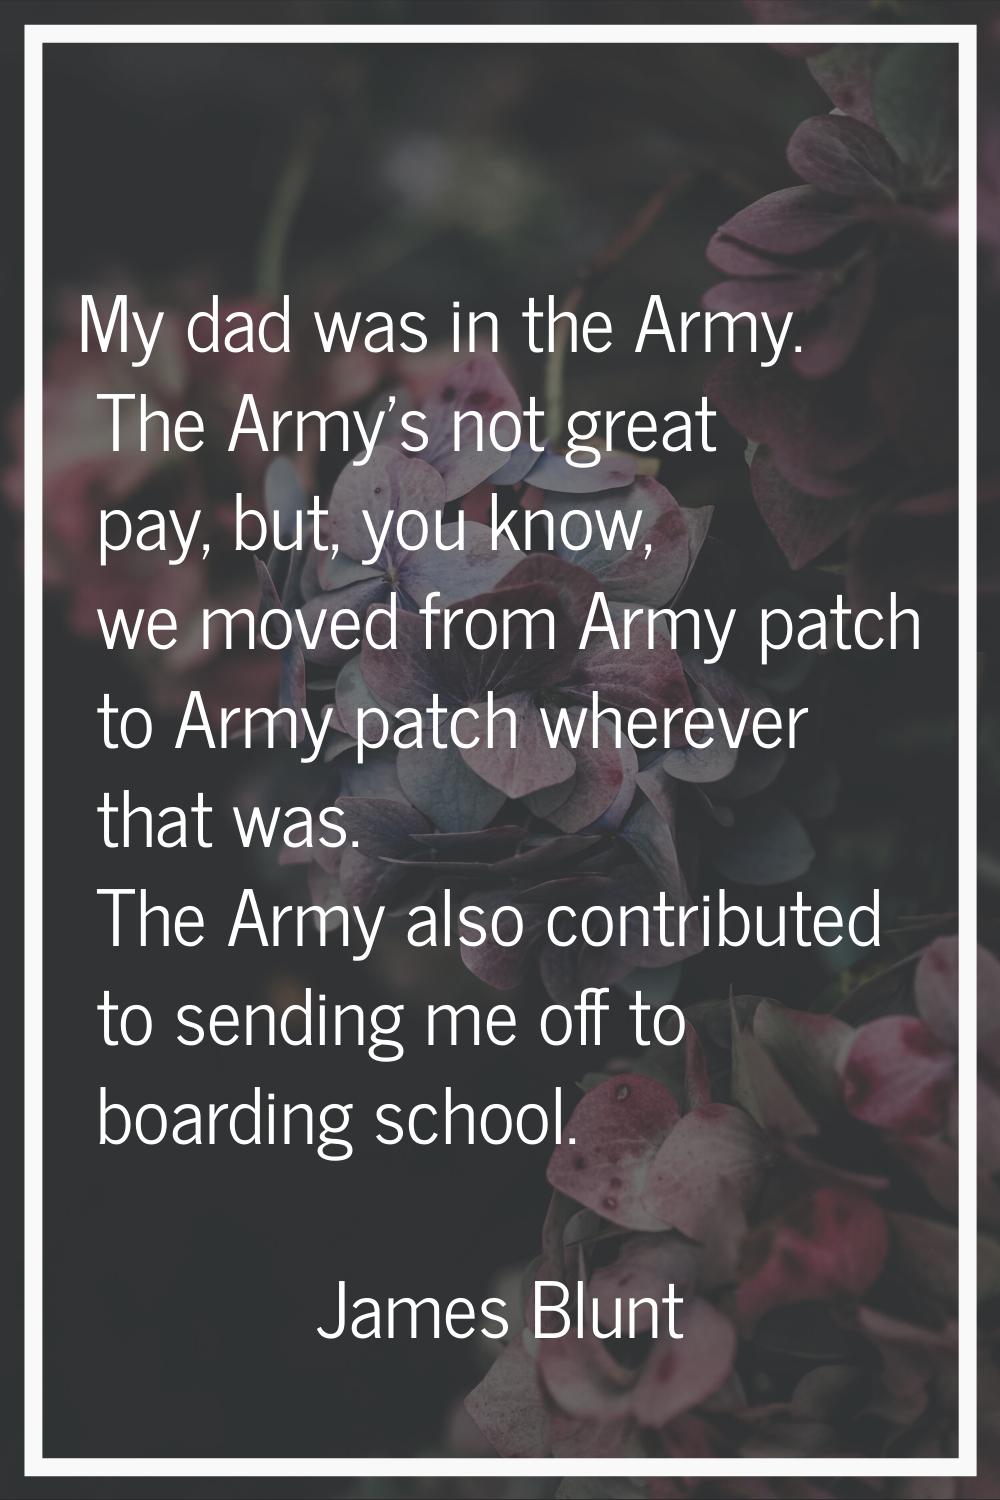 My dad was in the Army. The Army's not great pay, but, you know, we moved from Army patch to Army p